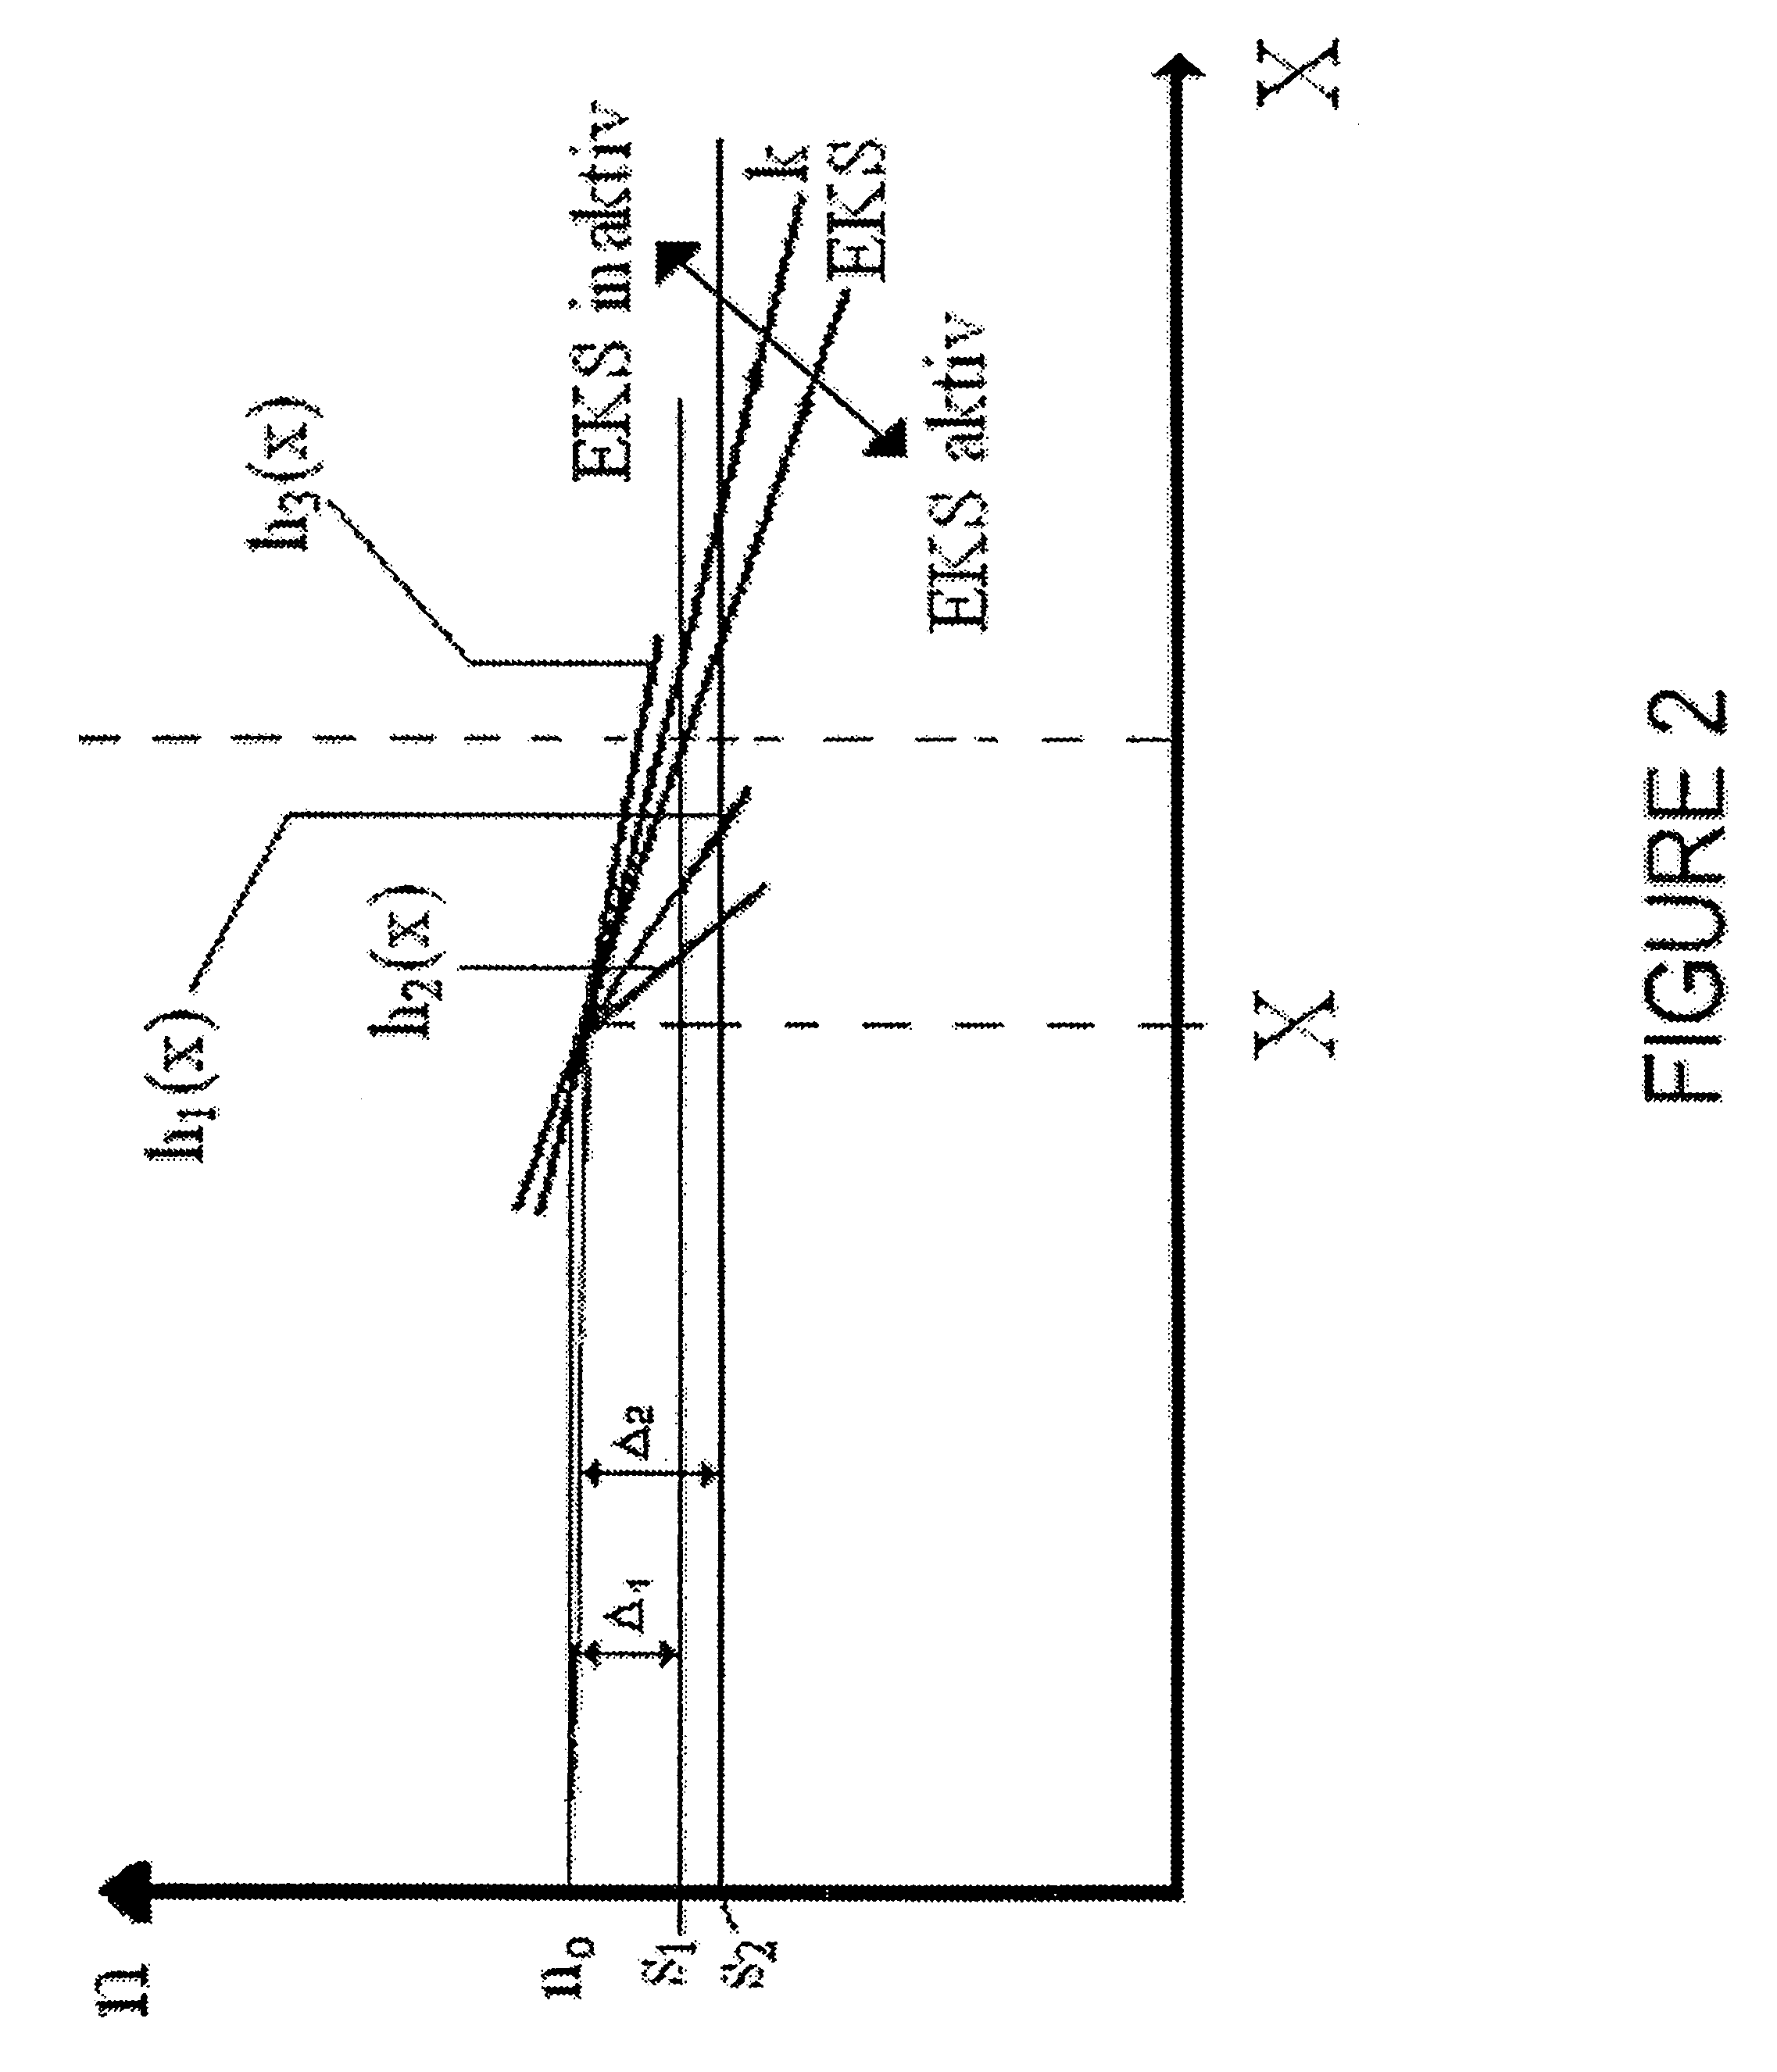 Controlling device of a regulating device of a motor vehicle